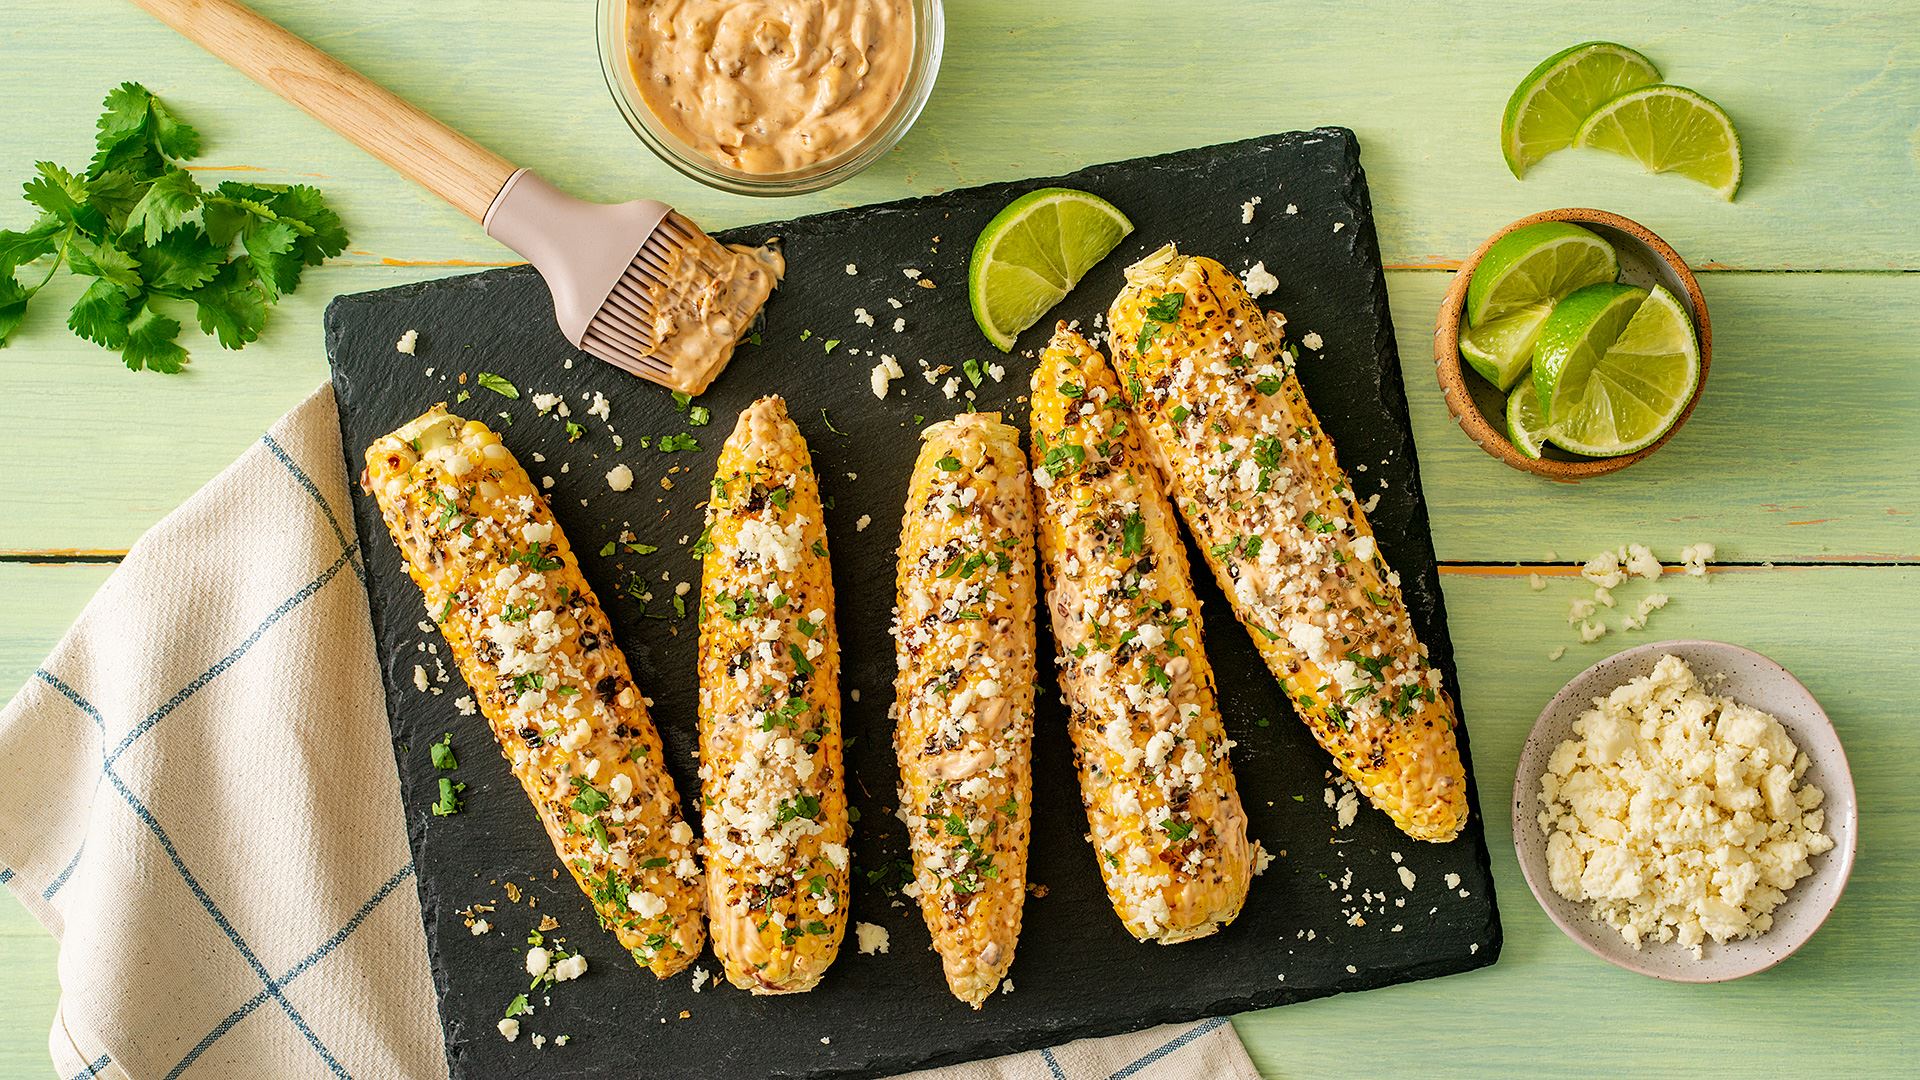 Grilled Mexican Corn with Chipotle Mayo